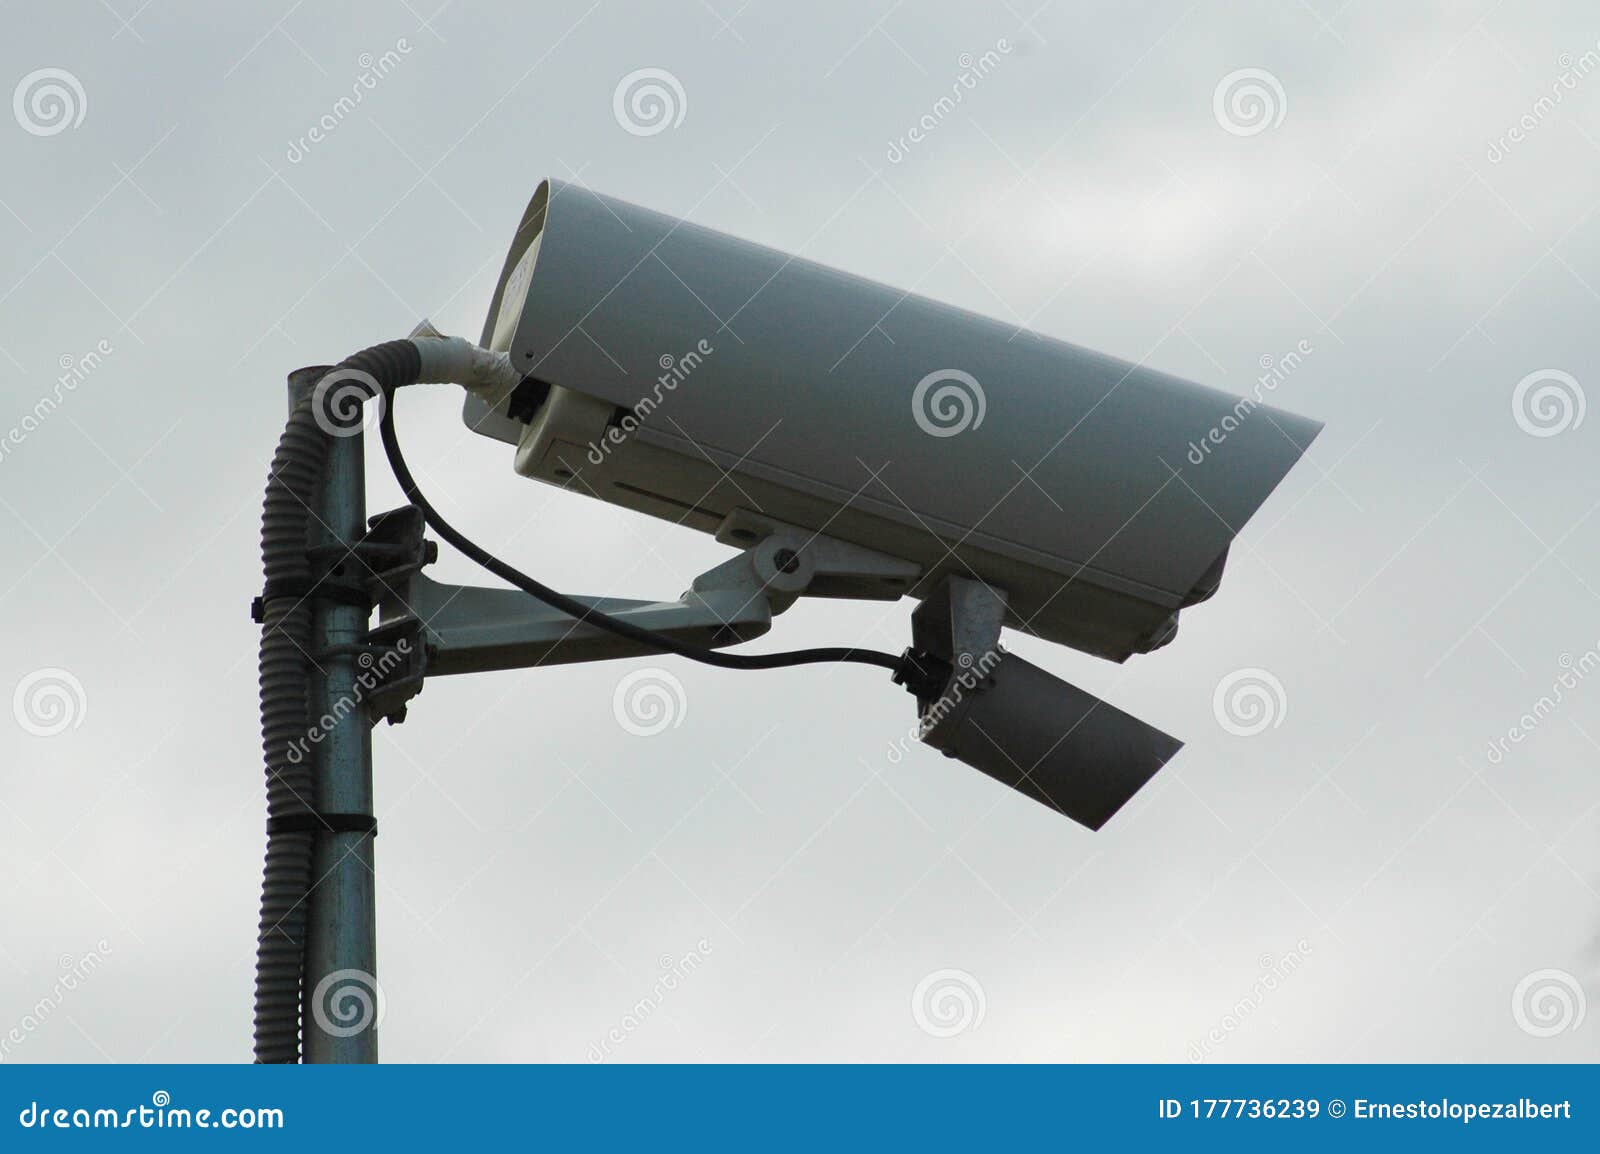 outdoor video surveillance camera on a cloudy day